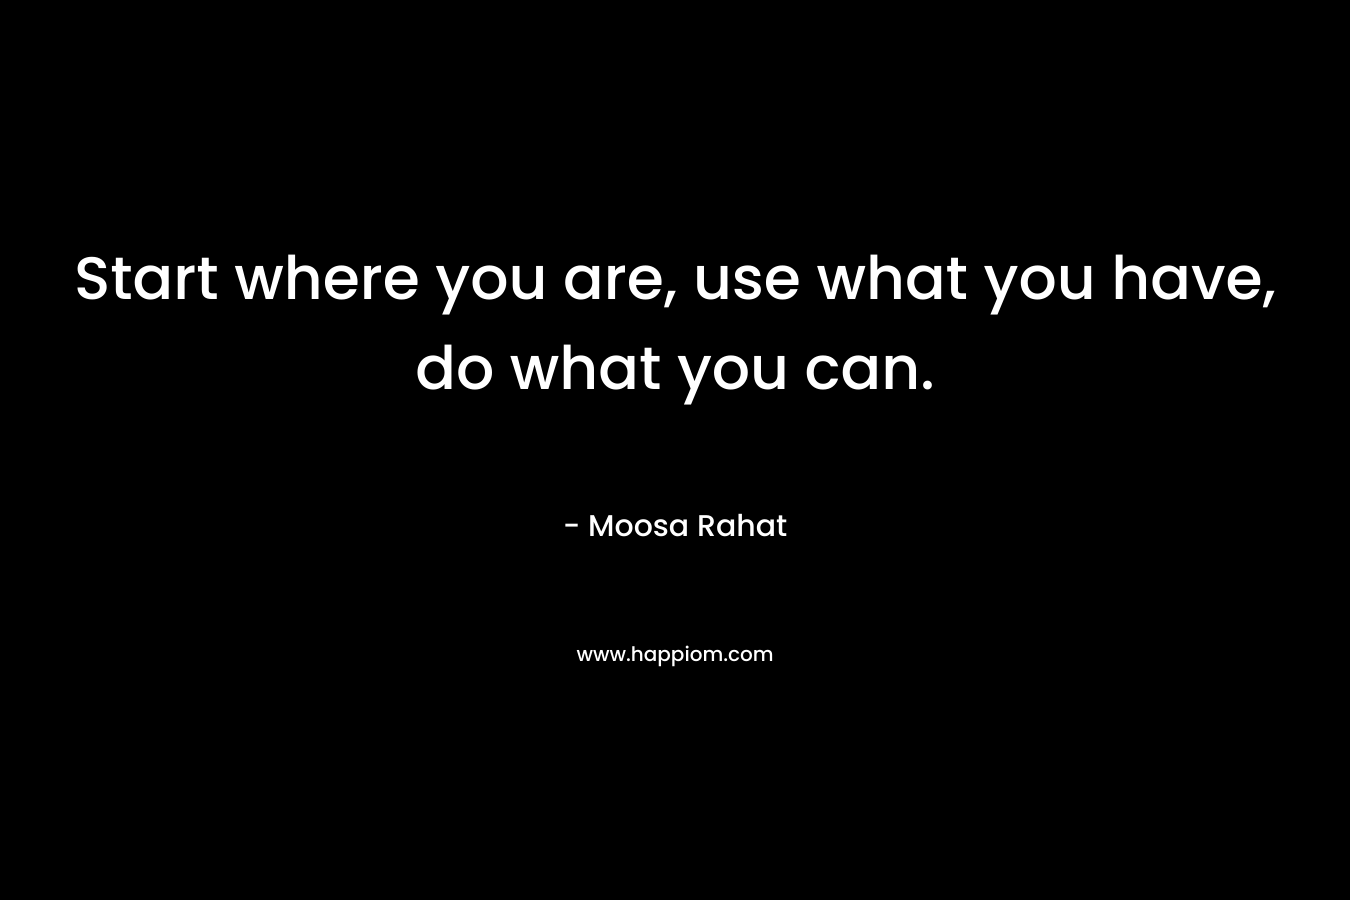 Start where you are, use what you have, do what you can. – Moosa Rahat